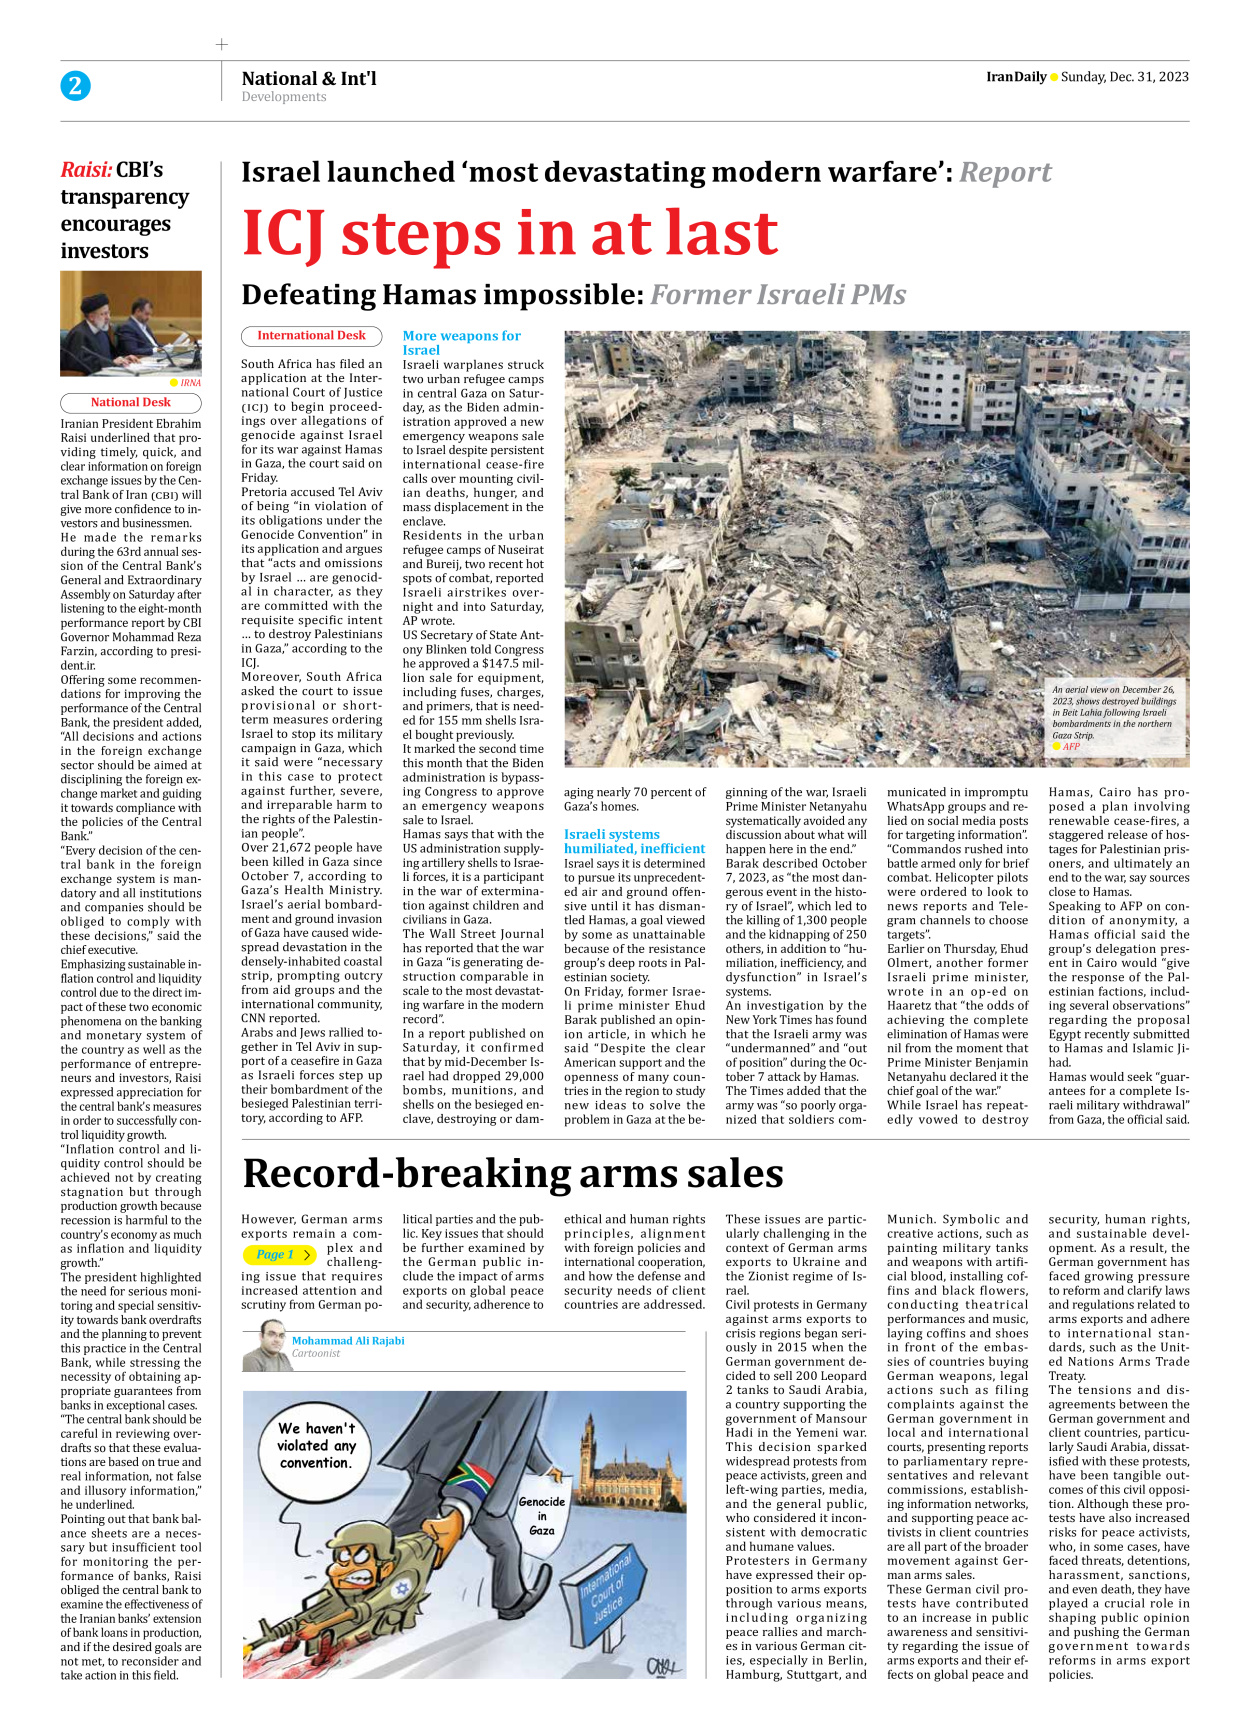 Iran Daily - Number Seven Thousand Four Hundred and Seventy Two - 31 December 2023 - Page 2